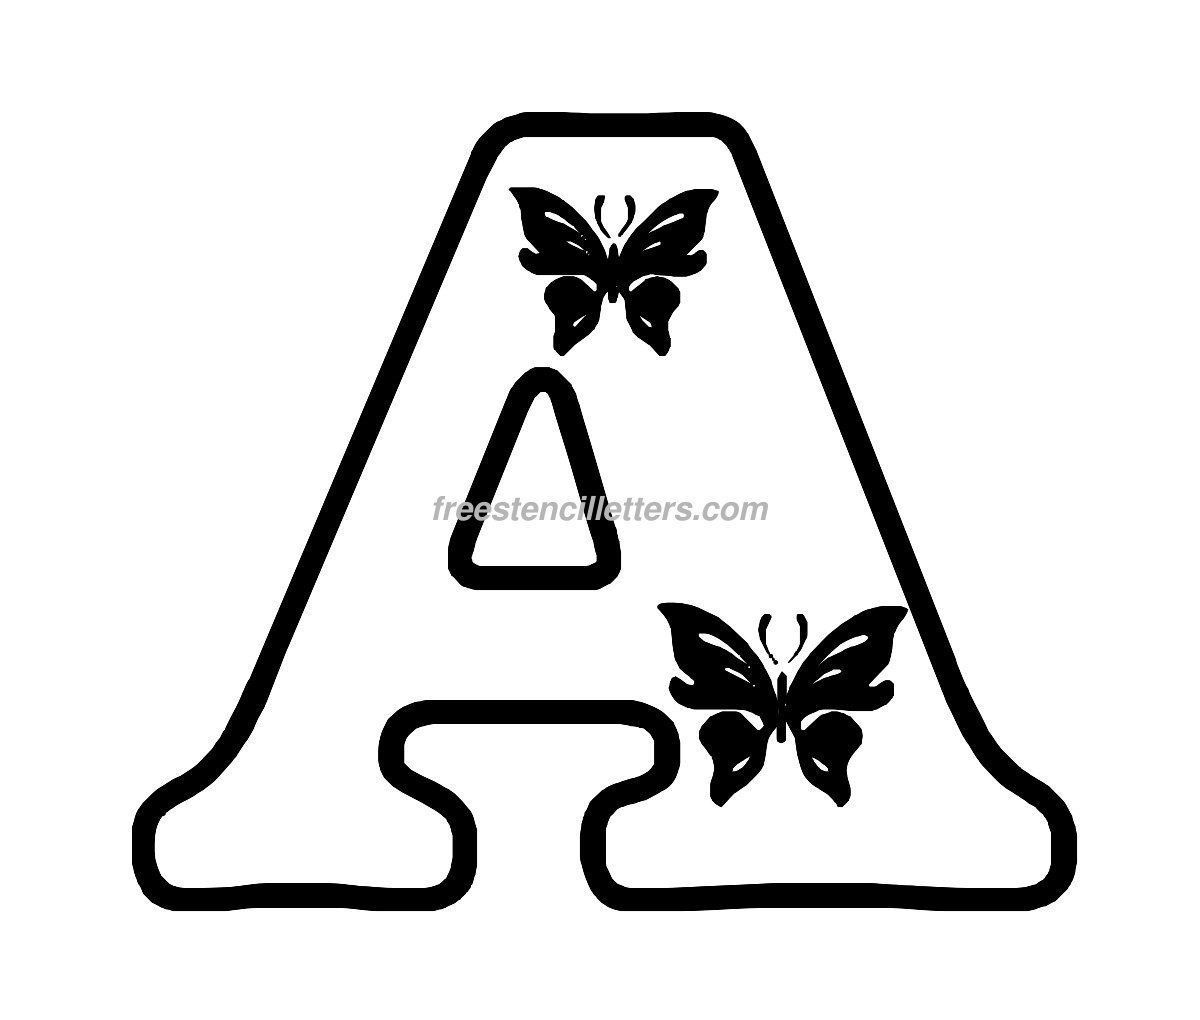 Free Butterfly Stencils To Print | Print A Letter Stencil | A - Free Printable Alphabet Stencils To Cut Out